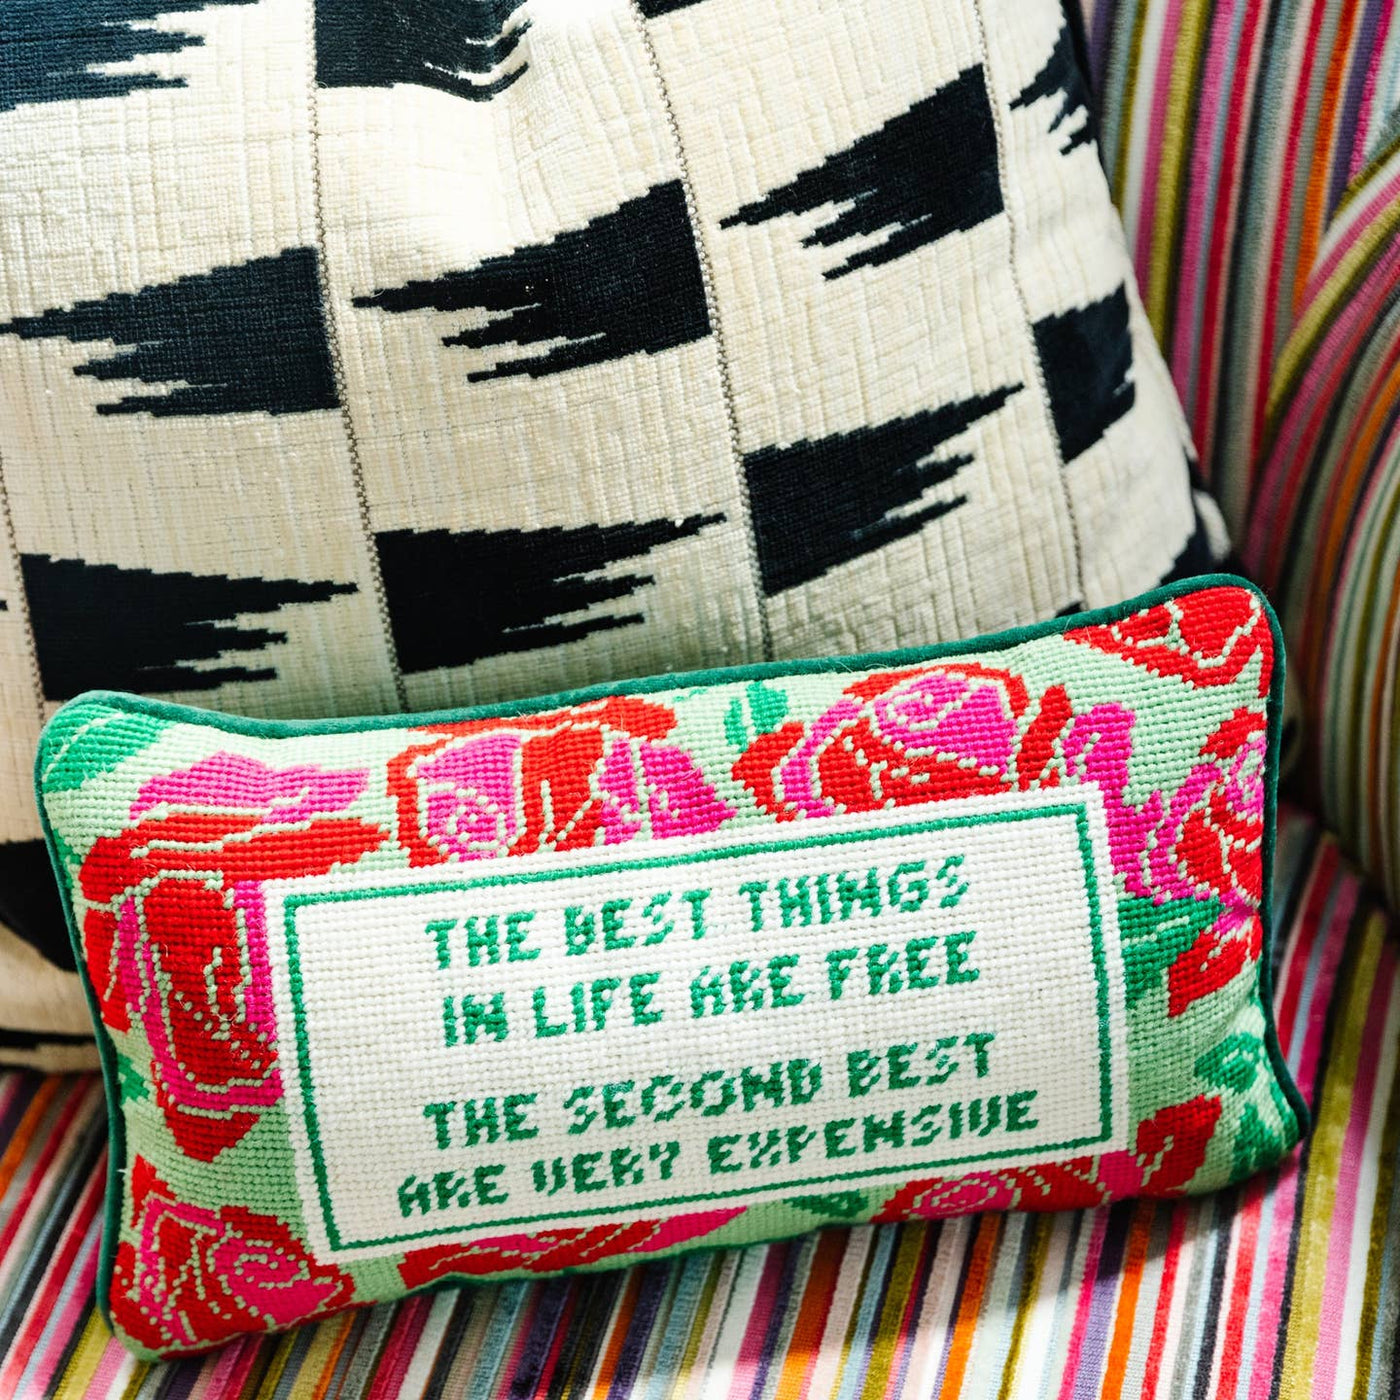 The Best Things In Life Needlepoint Pillow